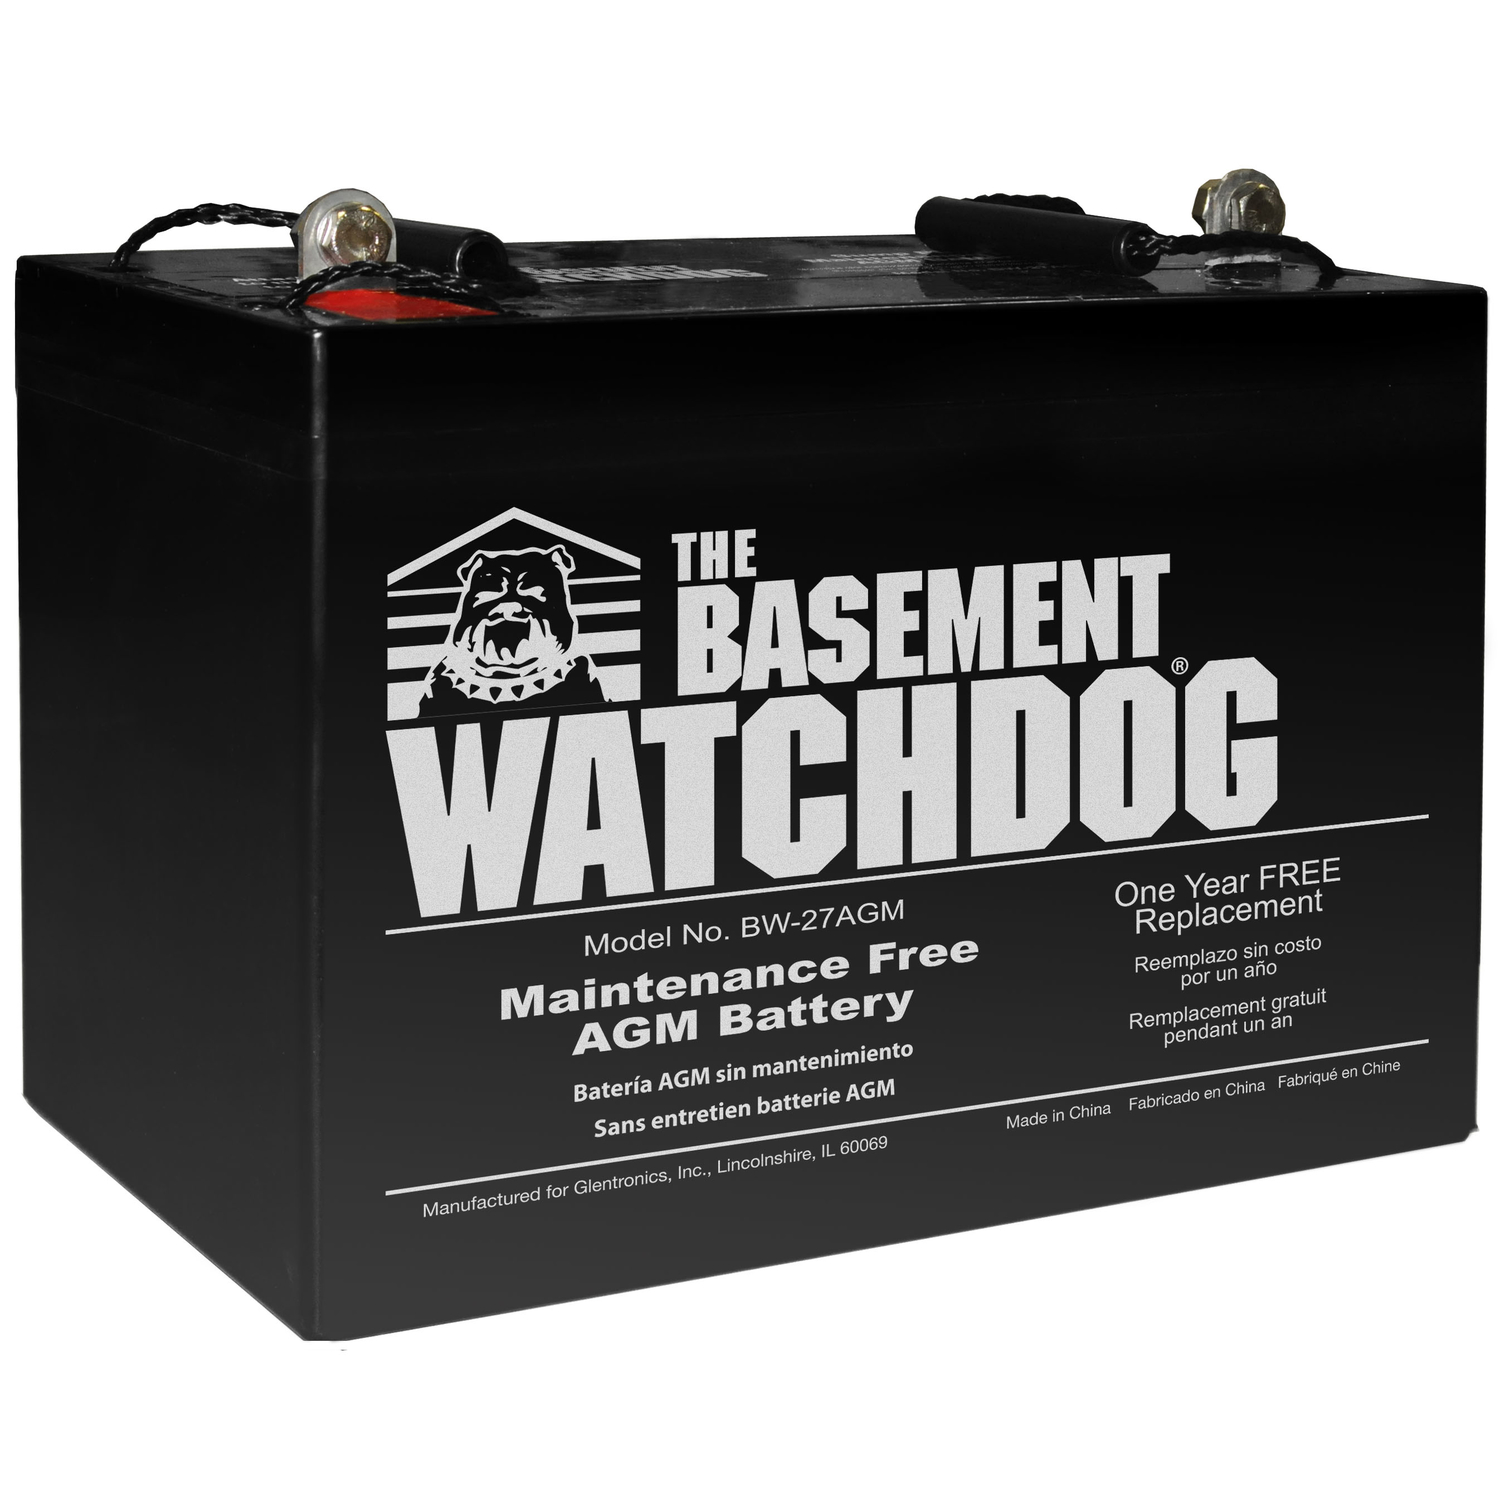 Photos - Other sanitary accessories The Basement Watchdog 9 in. H X 10-1/4 in. W X 6-1/2 in. L Maintenance Fre